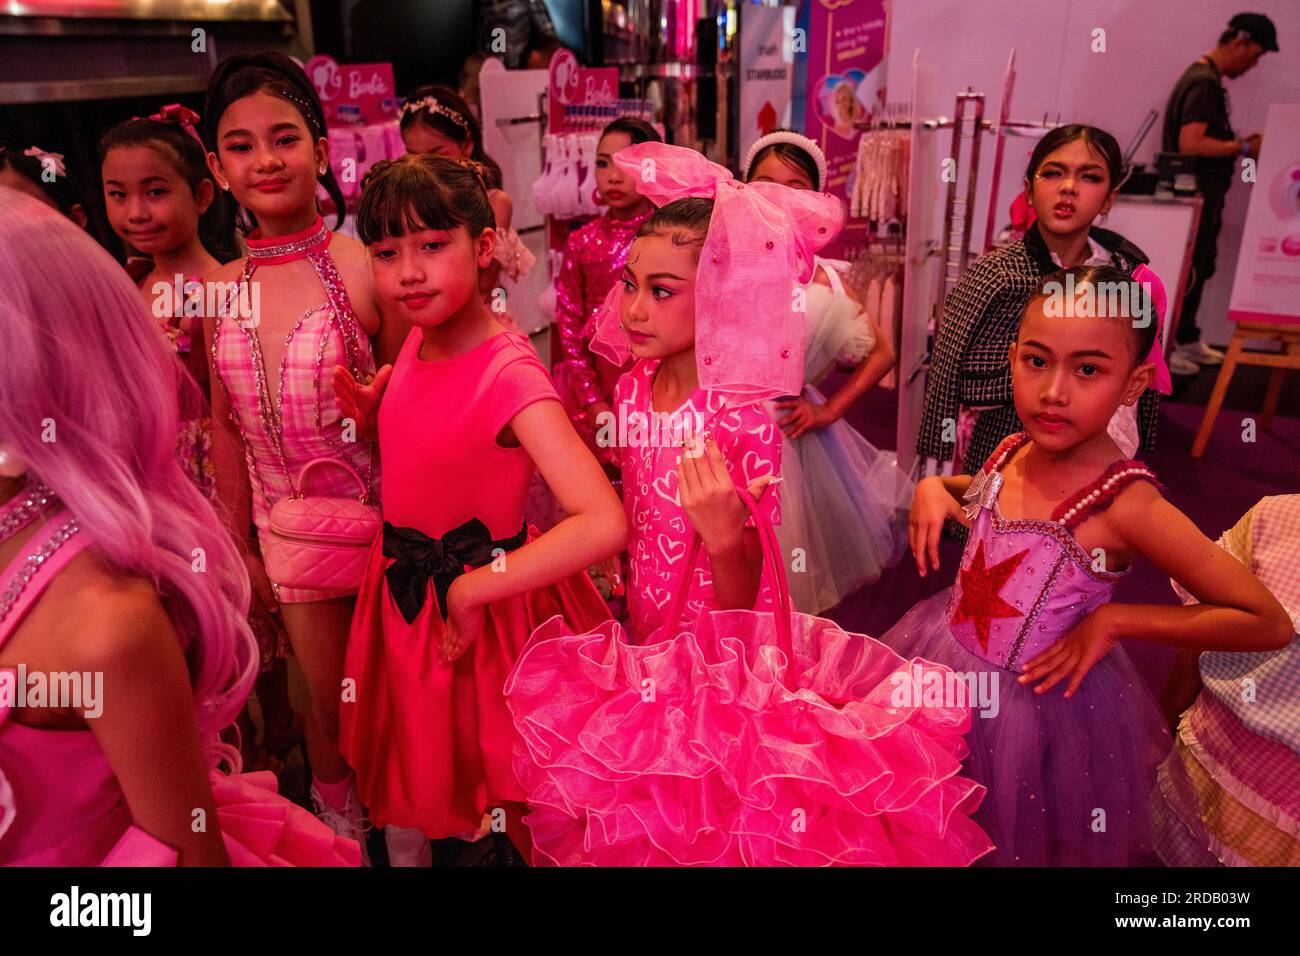 Bangkok, Thailand. 20th July, 2023. Girls get ready to perform backstage at the 'Barbie' movie premiere in Bangkok. Fans and artists attend the exclusive pink carpet premiere of 'Barbie' at Siam Paragon Cineplex on July 19, 2023. Credit: Matt Hunt/Neato/Alamy Live News Stock Photo